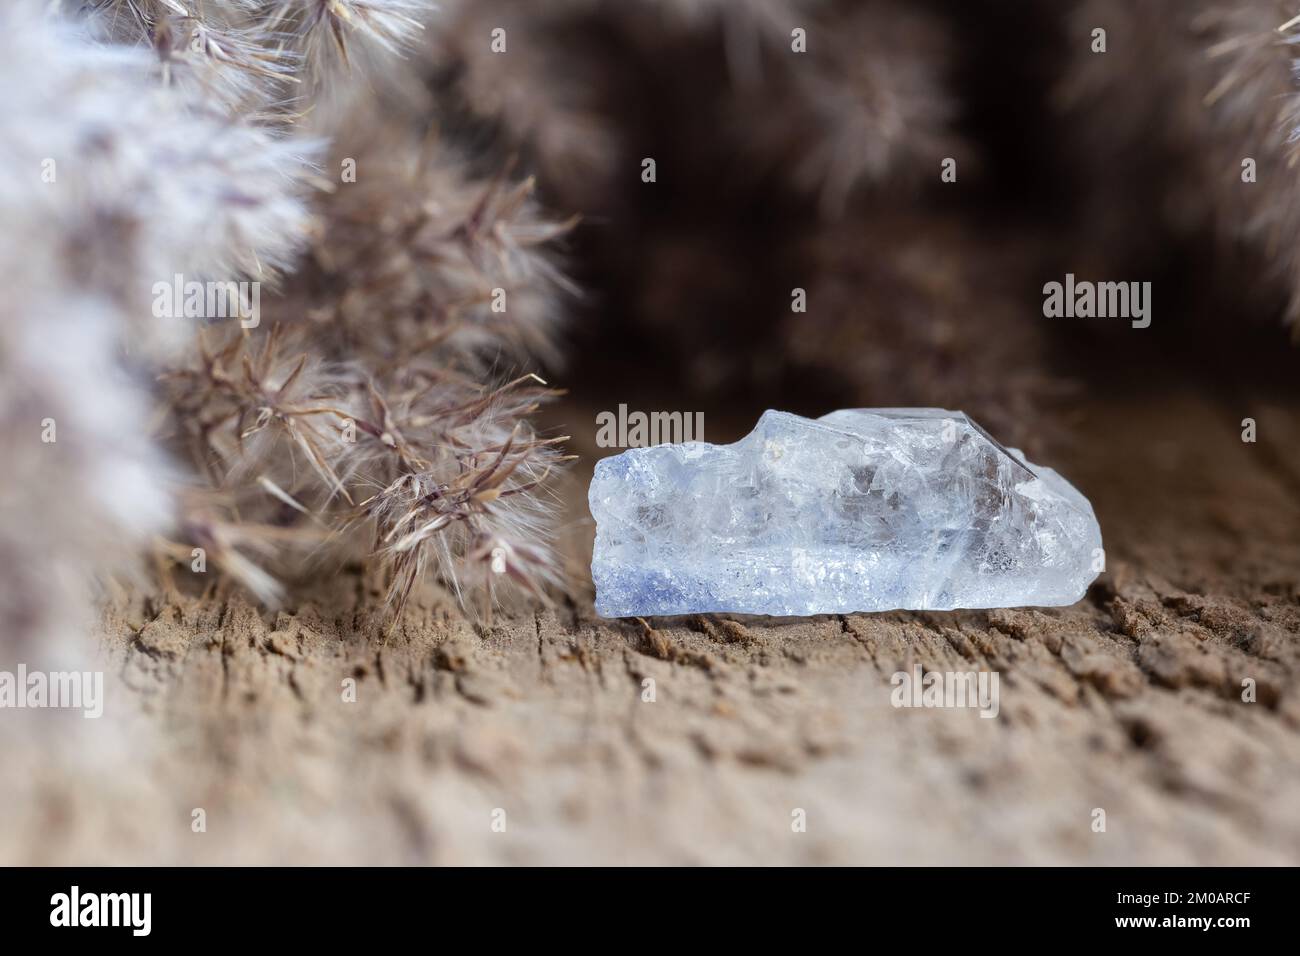 Quartz with Rare Blue Dumortierite Inclusions Mineral Crystal Stone on Wooden Background. Healing Crystals and Minerals Collection Stock Photo